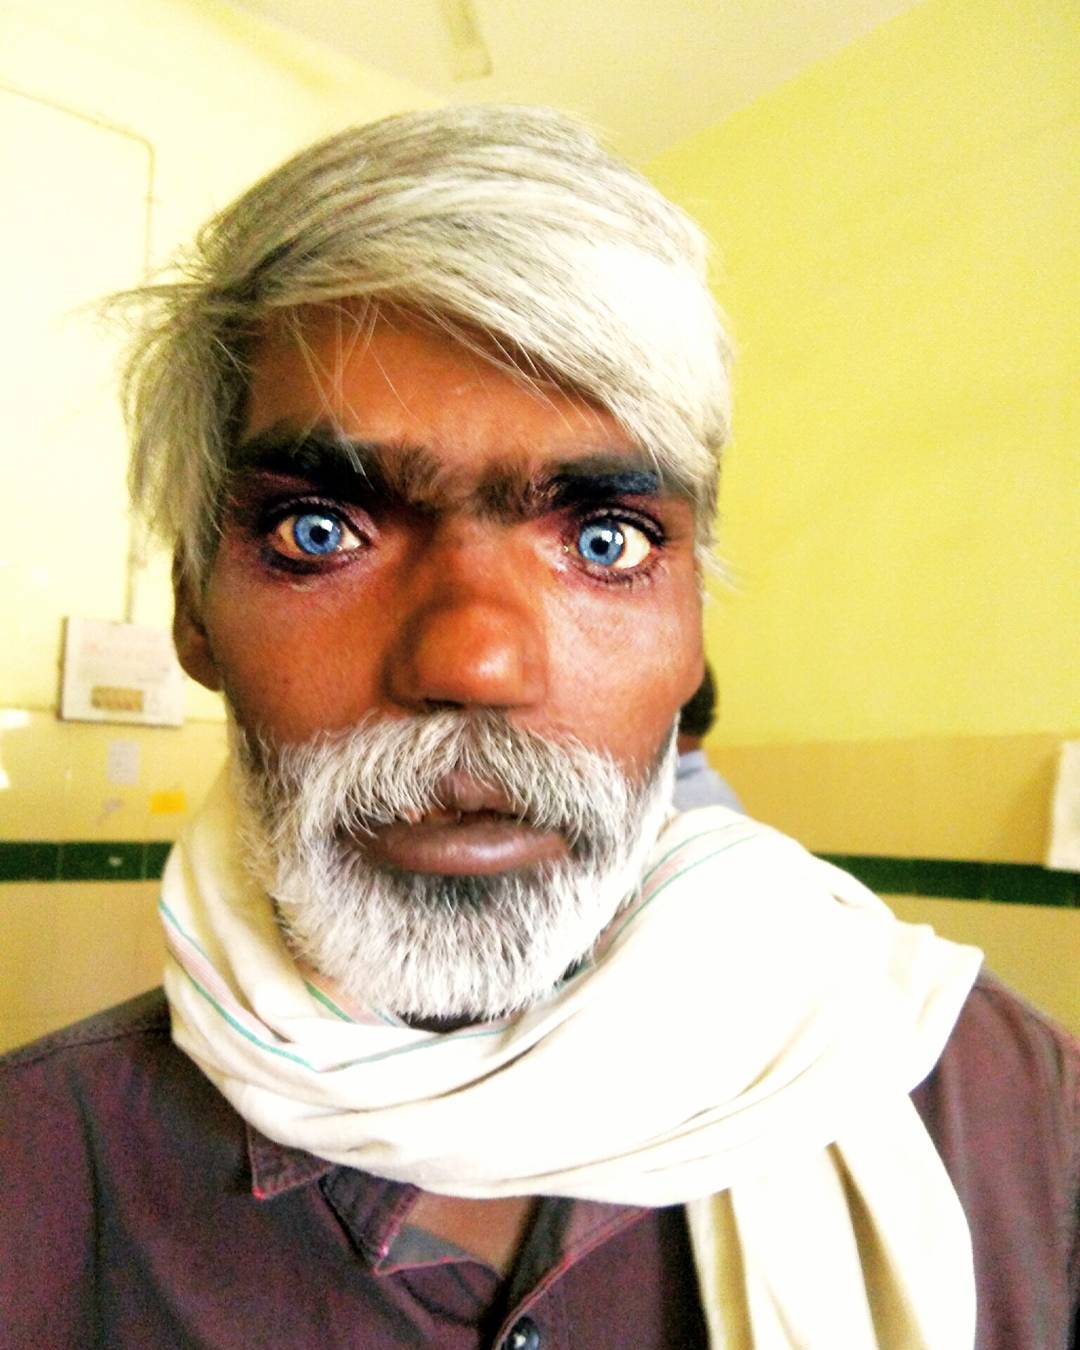 Waardenburg syndrome can cause brilliantly blue eyes and white hair.